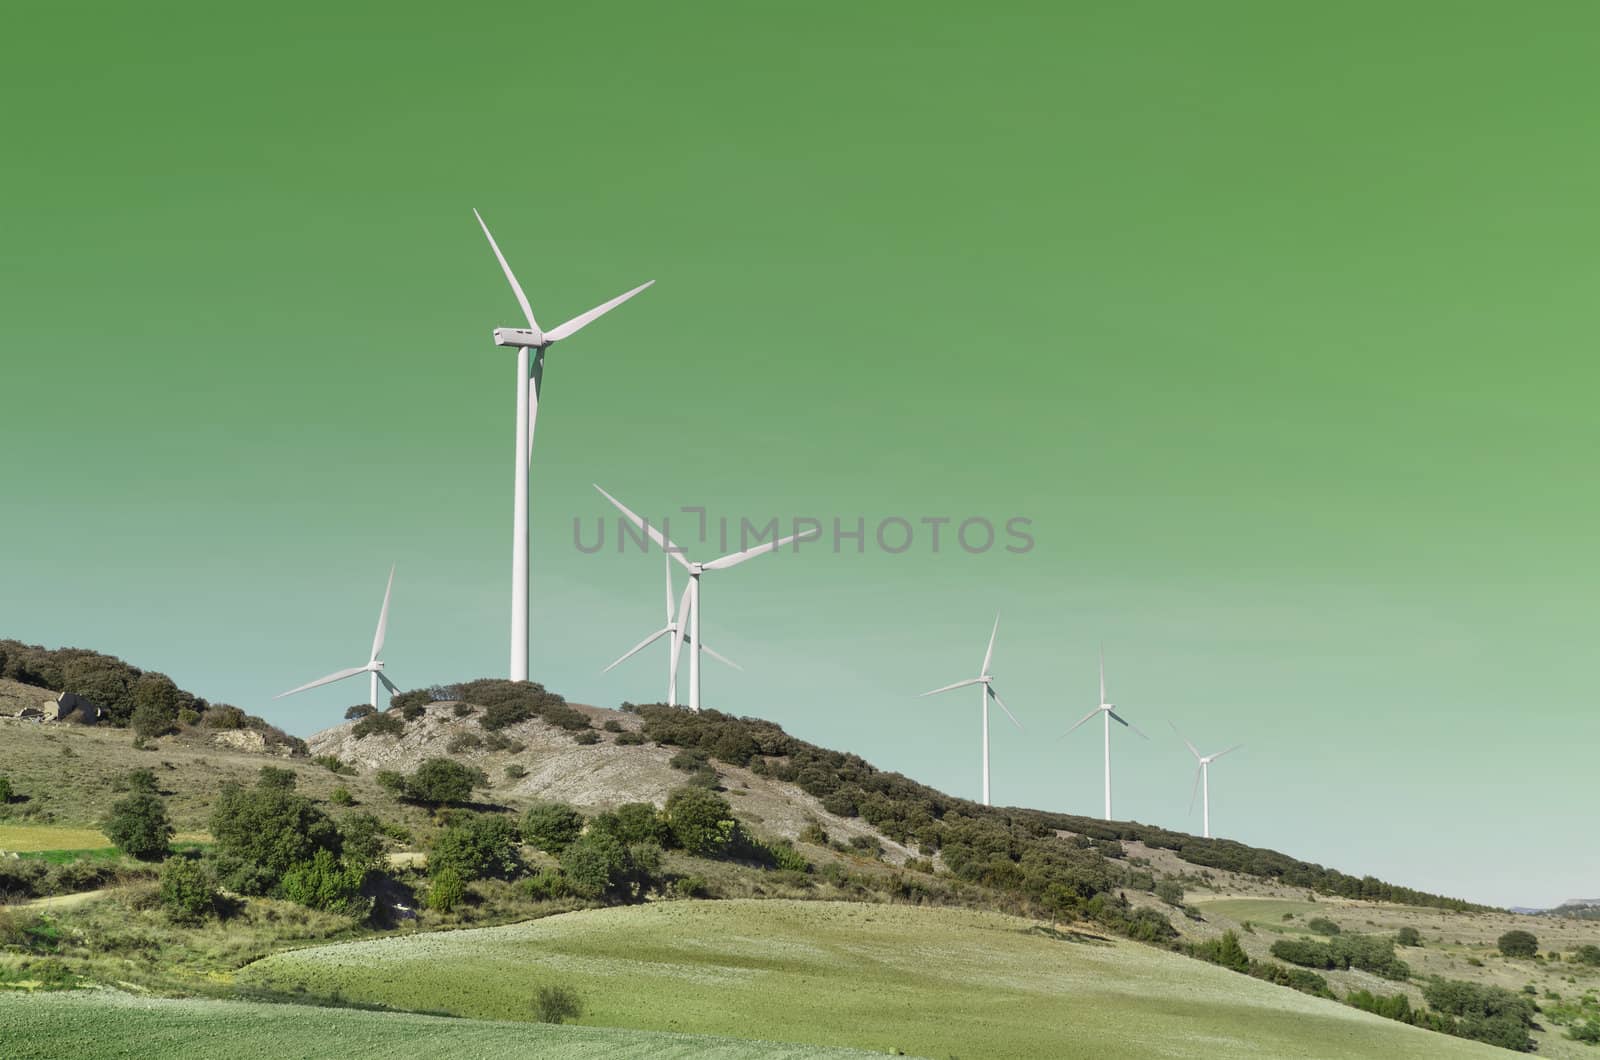  Wind turbines over Green background. Clean energy concept.